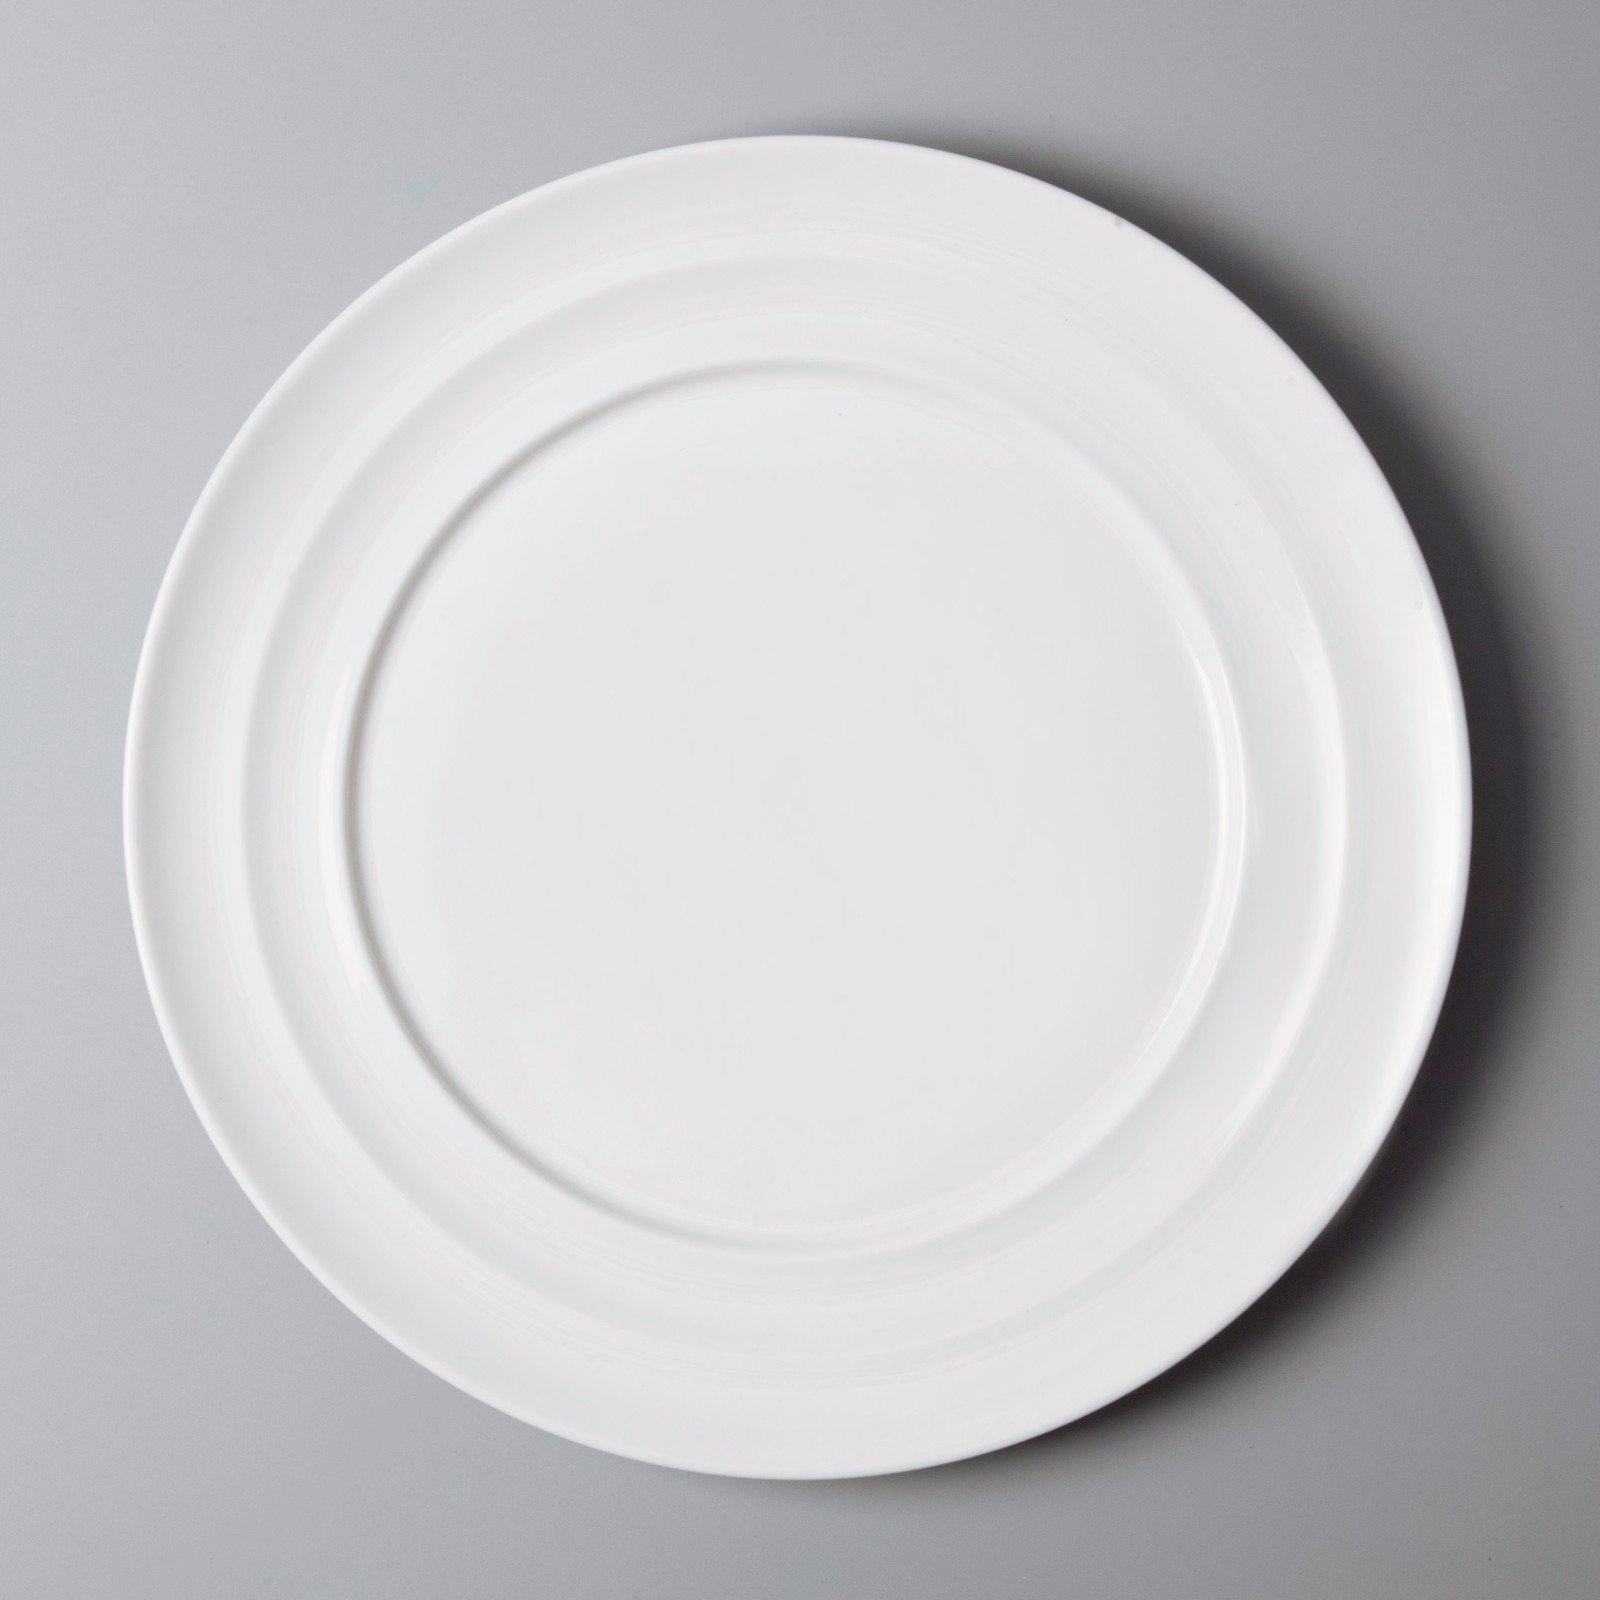 glaze commercial restaurant plates German style directly sale for bistro-3